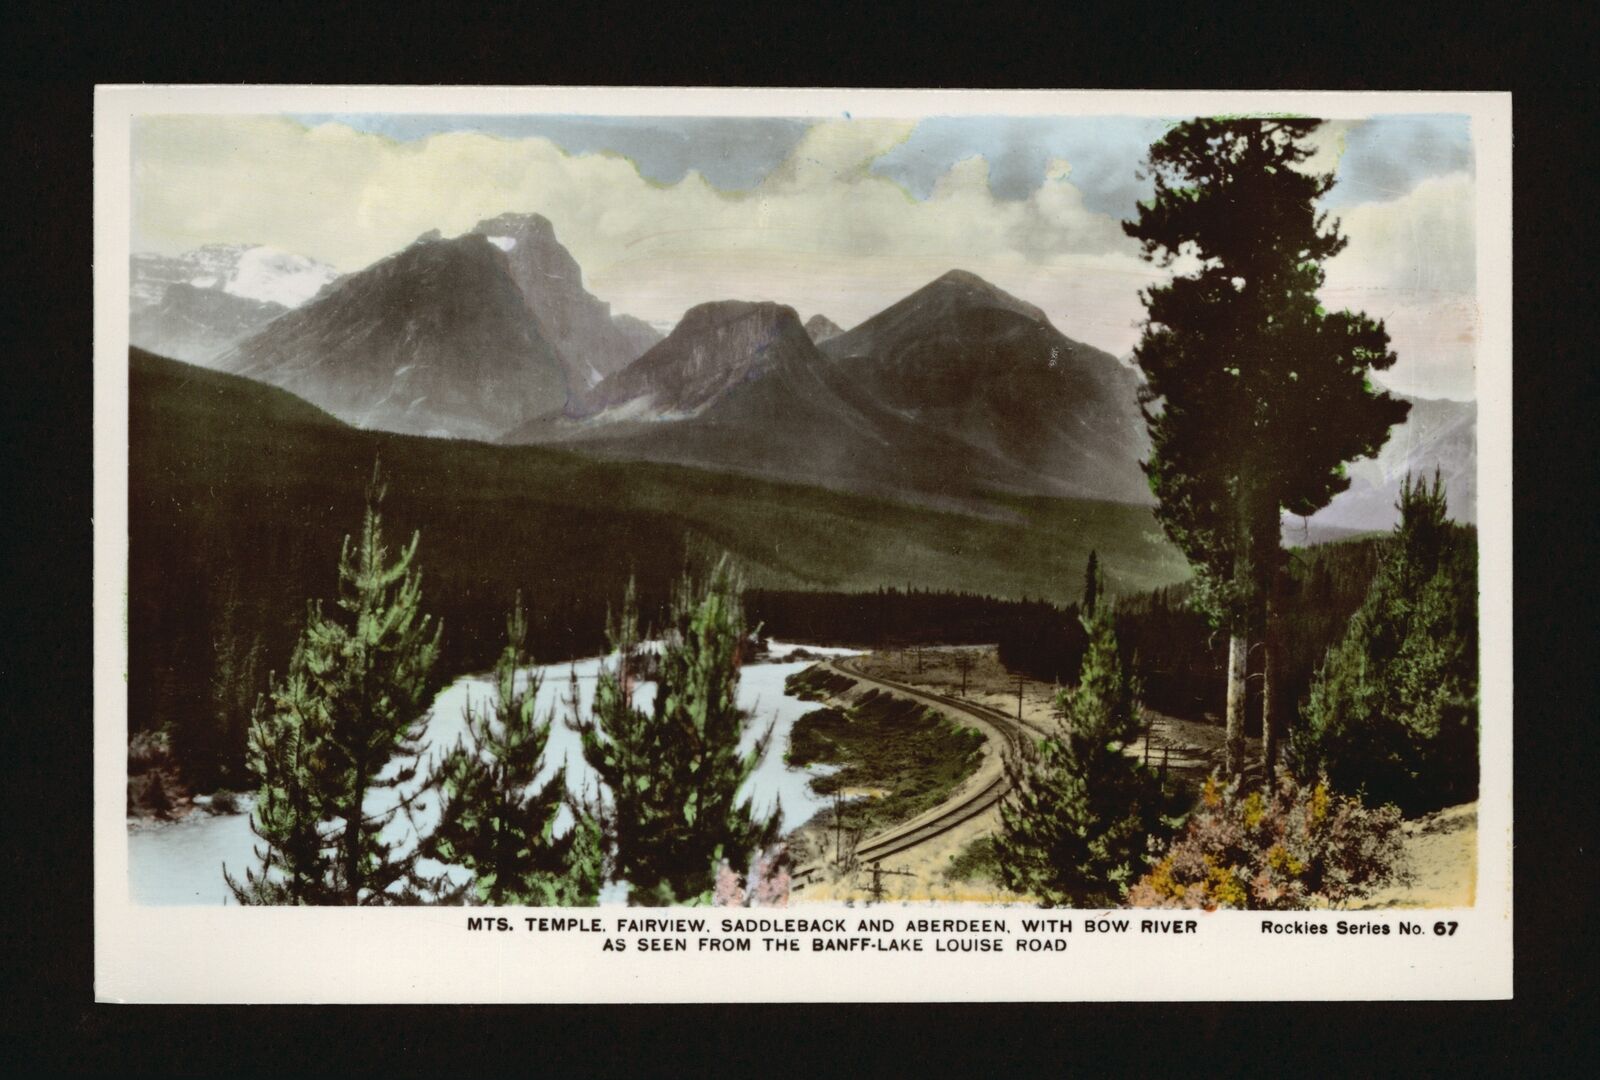 Mts Temple Fairview Saddleback and Aberdeen with Bow River as seen- Old Photo 1